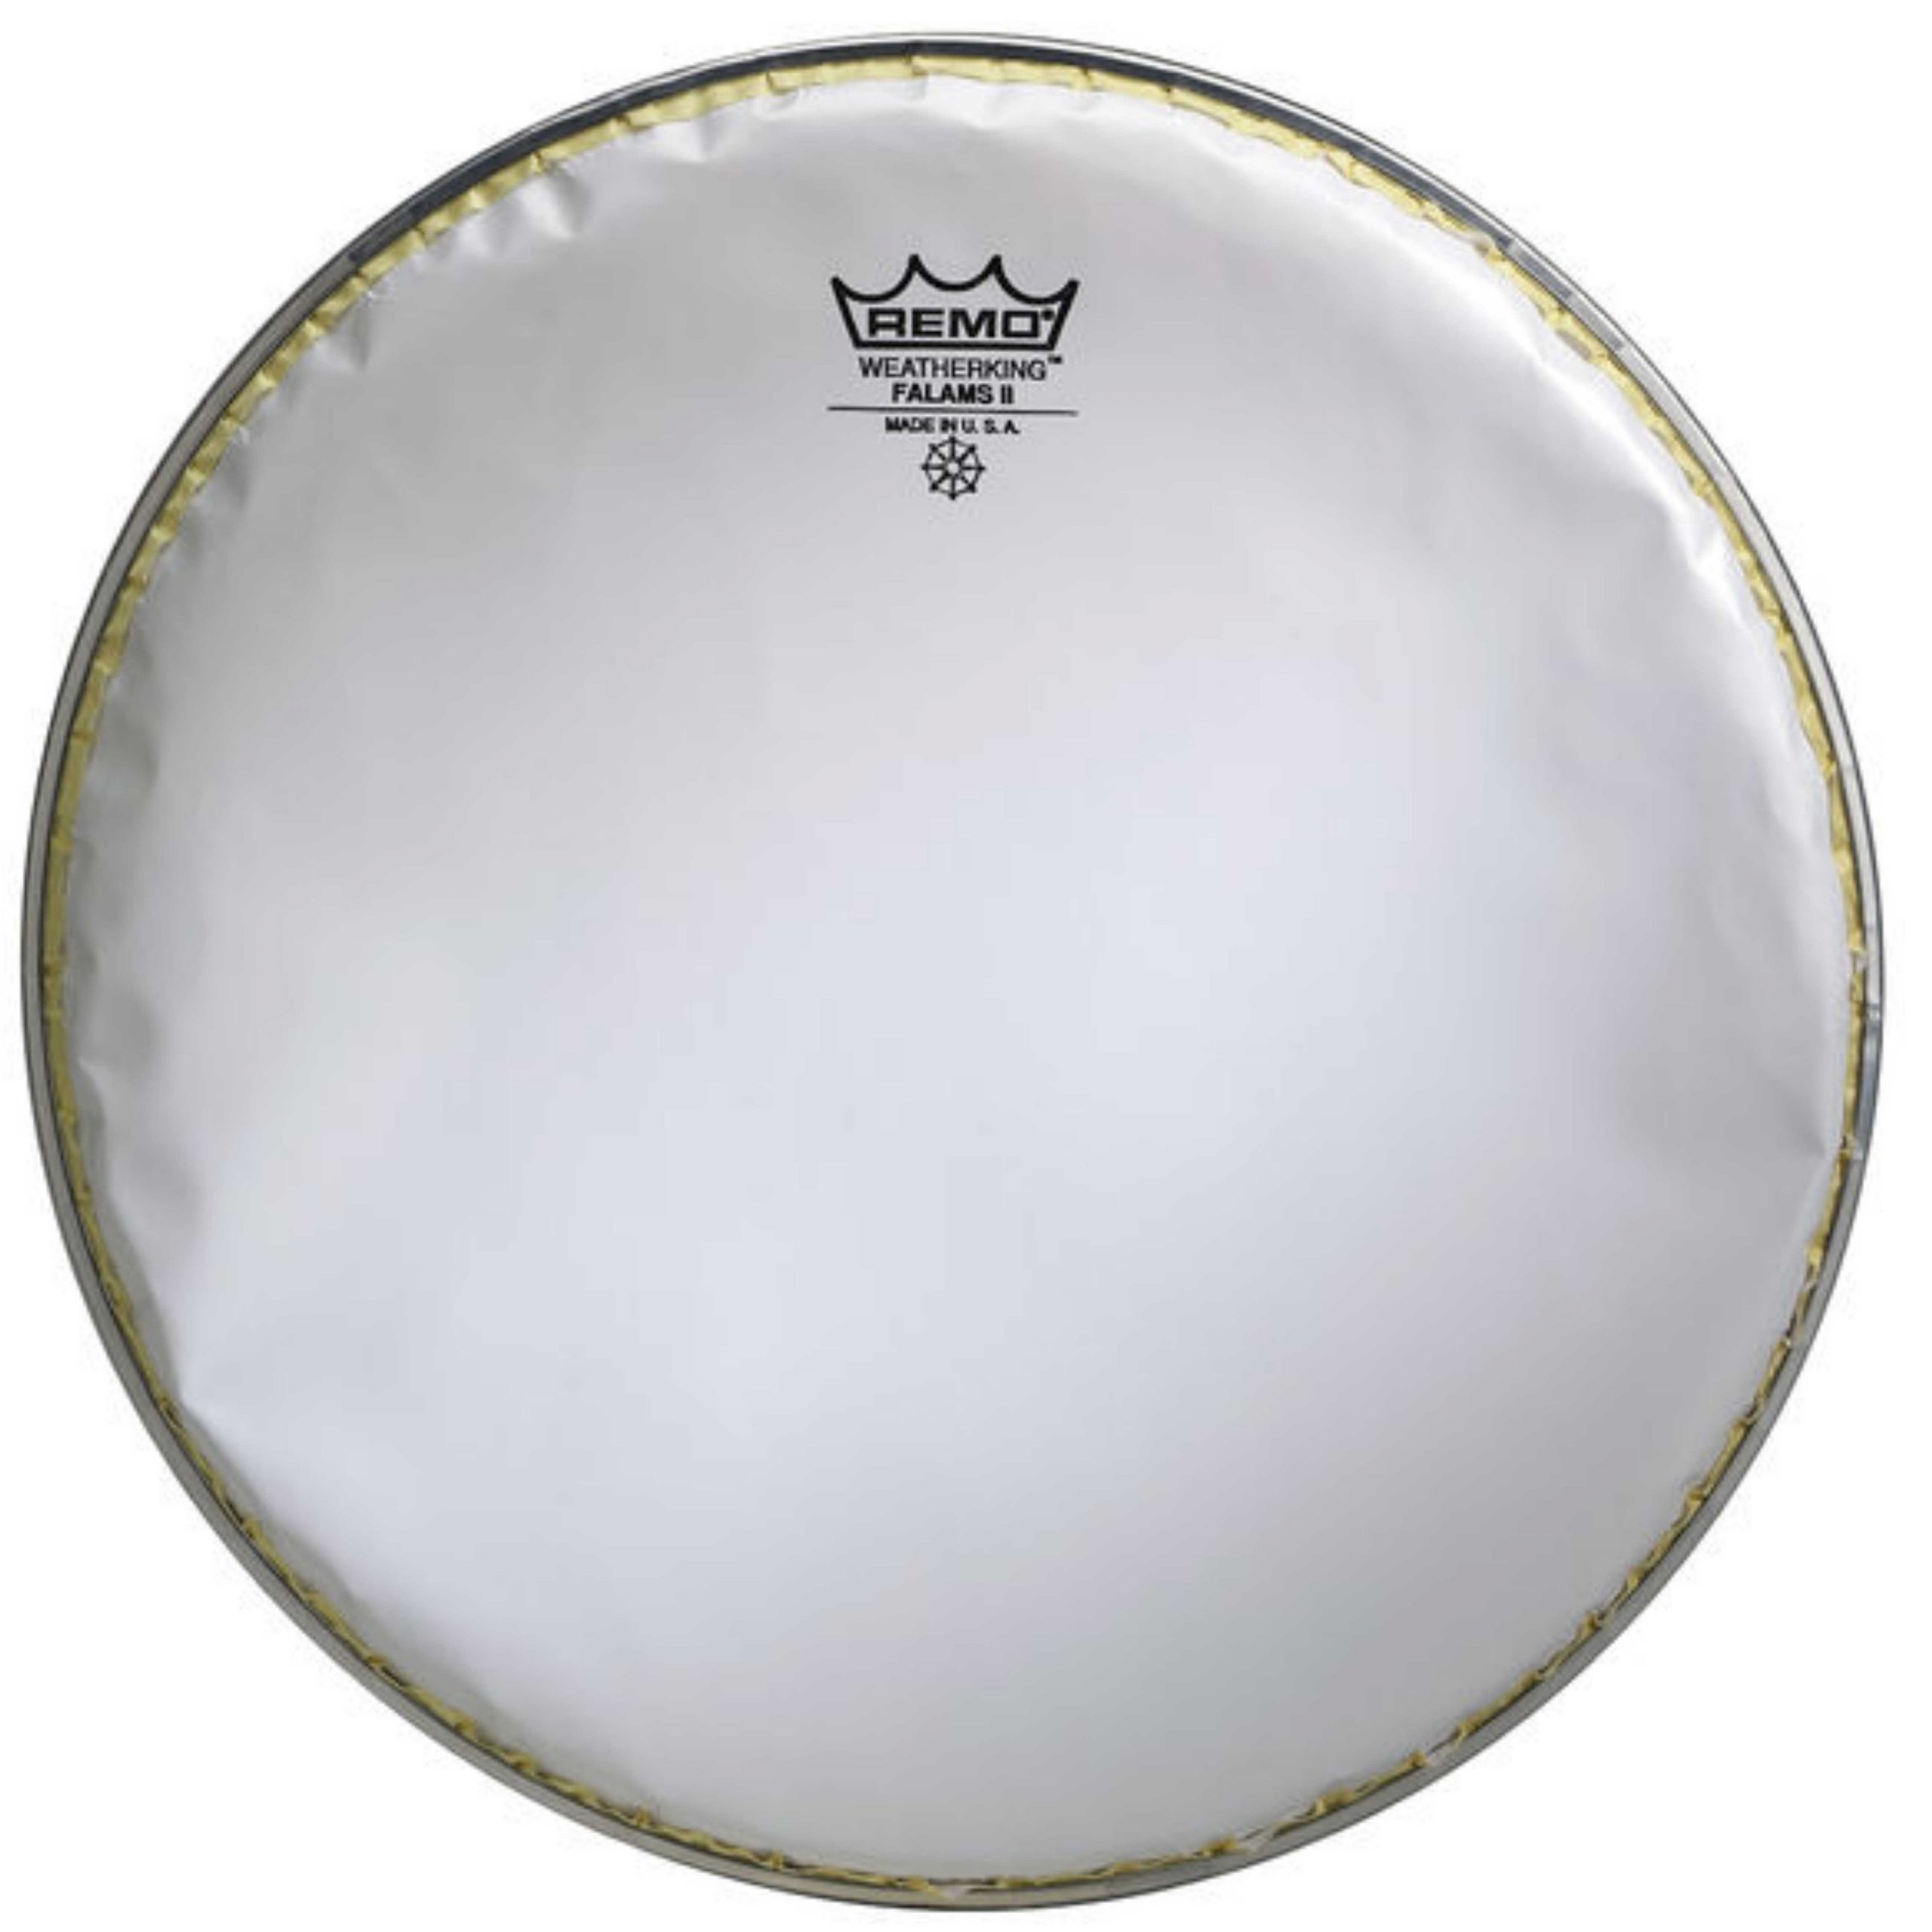 Remo Falams Smooth White - 14" Marching Snare Side Drum Head